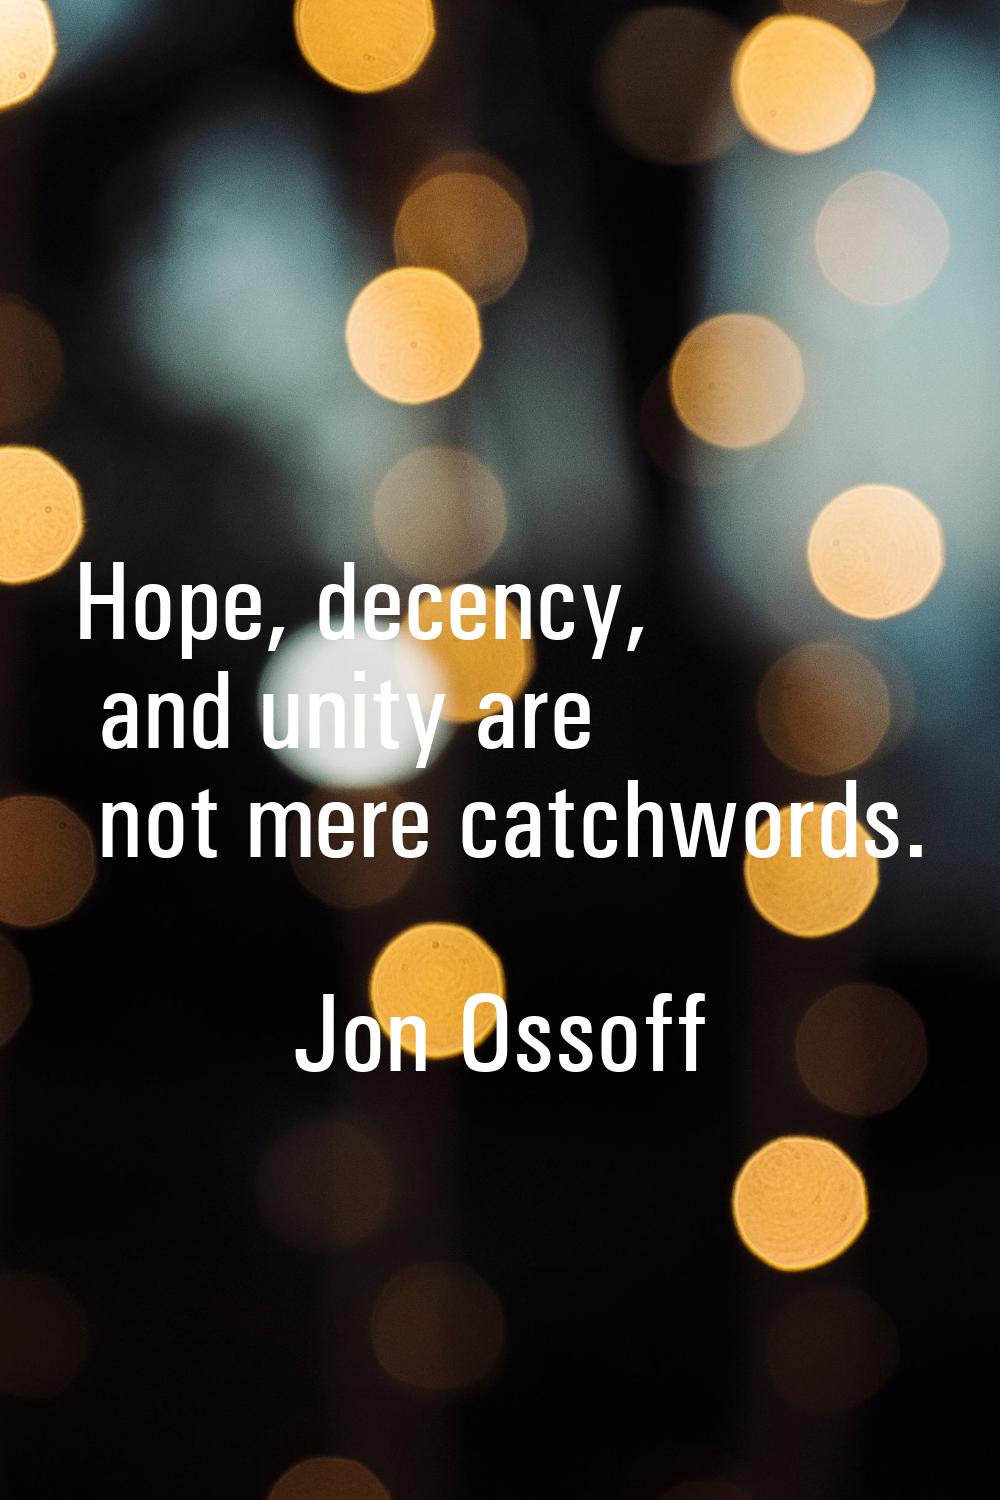 Hope, decency, and unity are not mere catchwords.